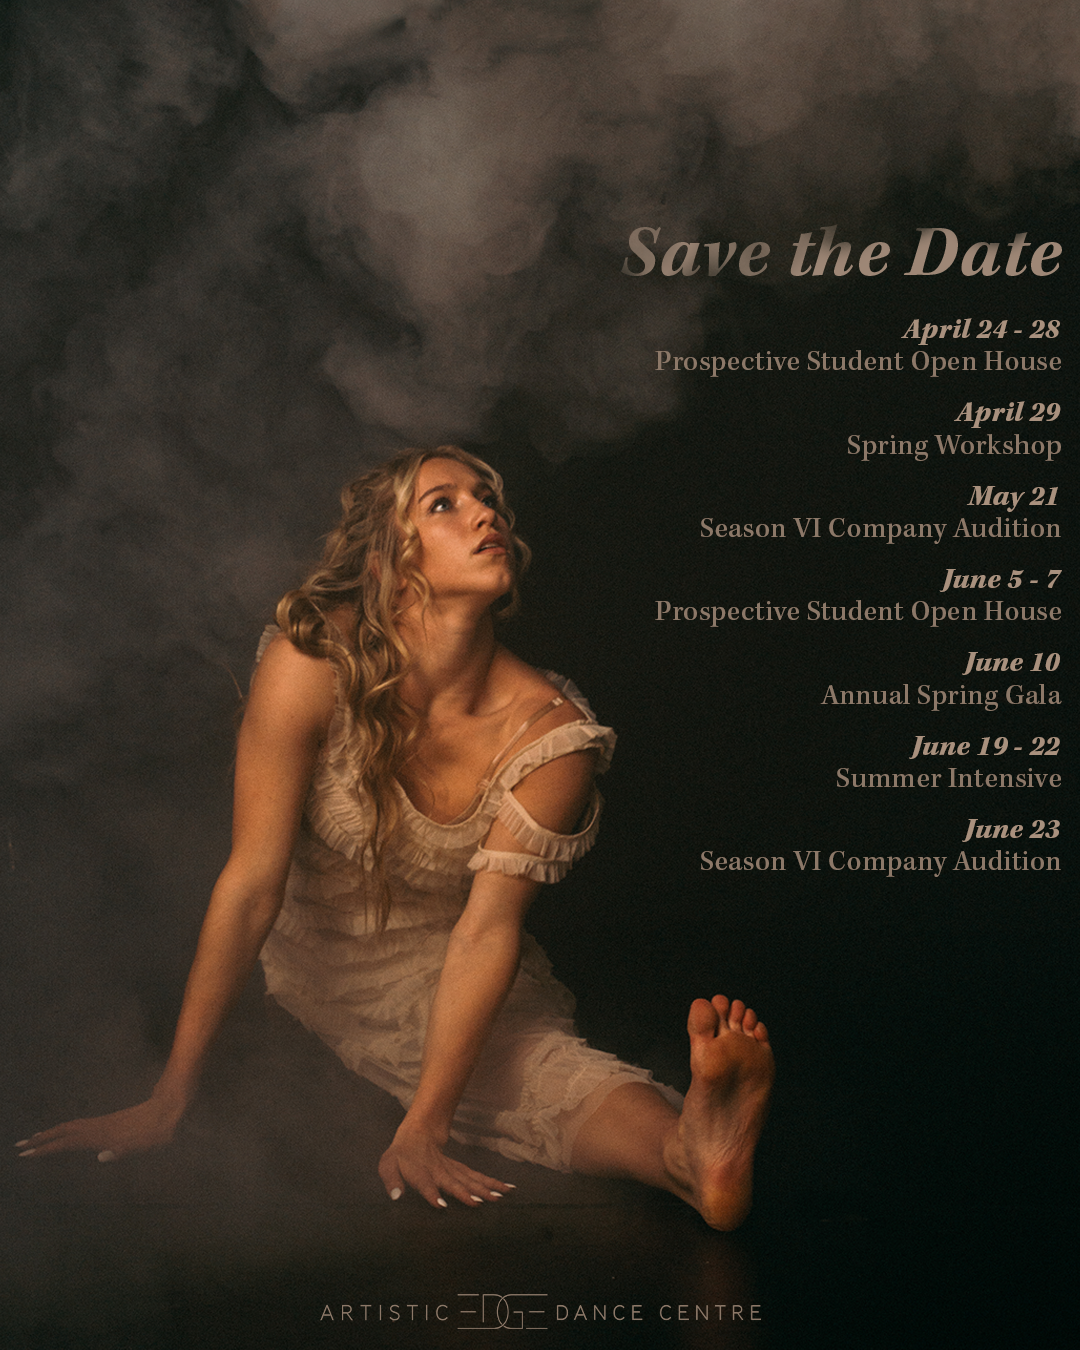 girl with blonde hair in the splits, black background with smoke, text reads 'Save the Date' to promote upcoming dates for Artistic Edge Dance Centre